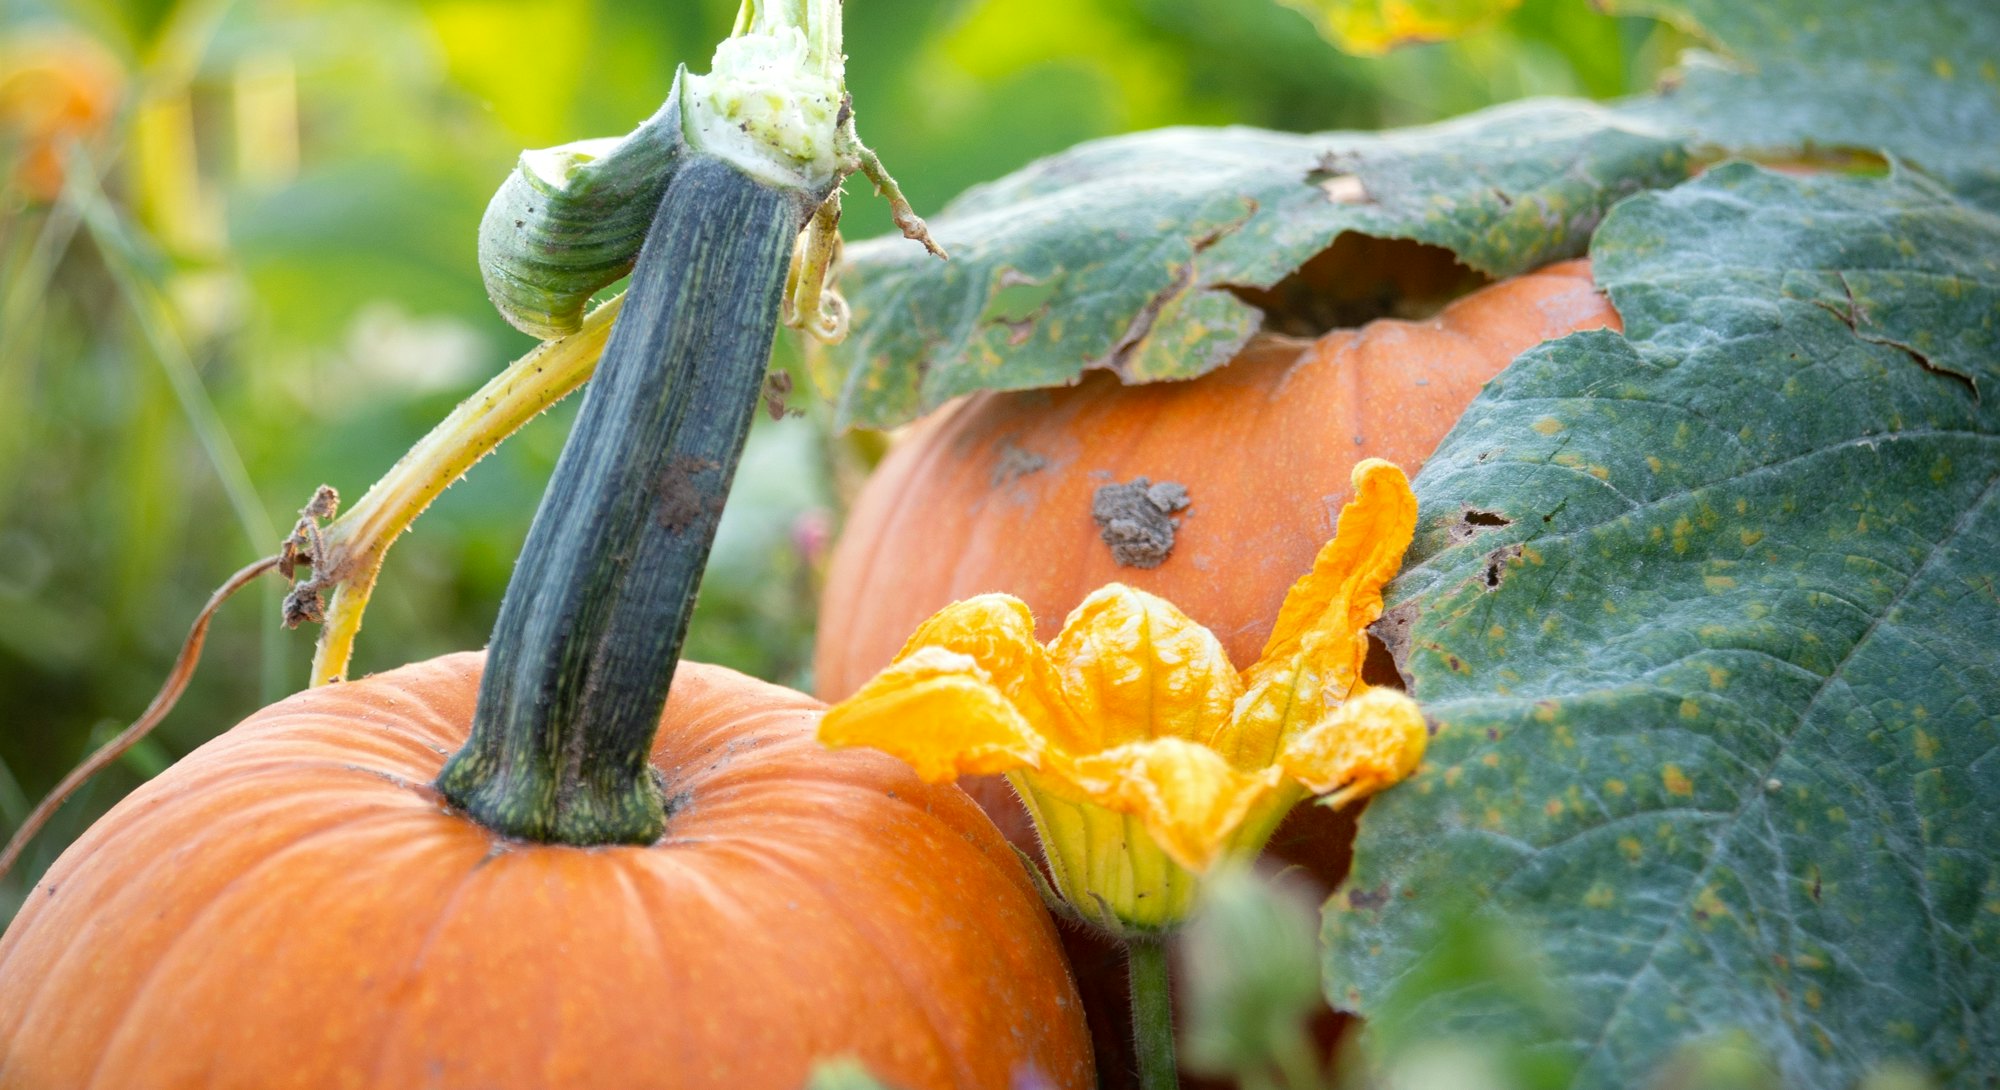 Two pumpkins on the vine in a pumpkin patch